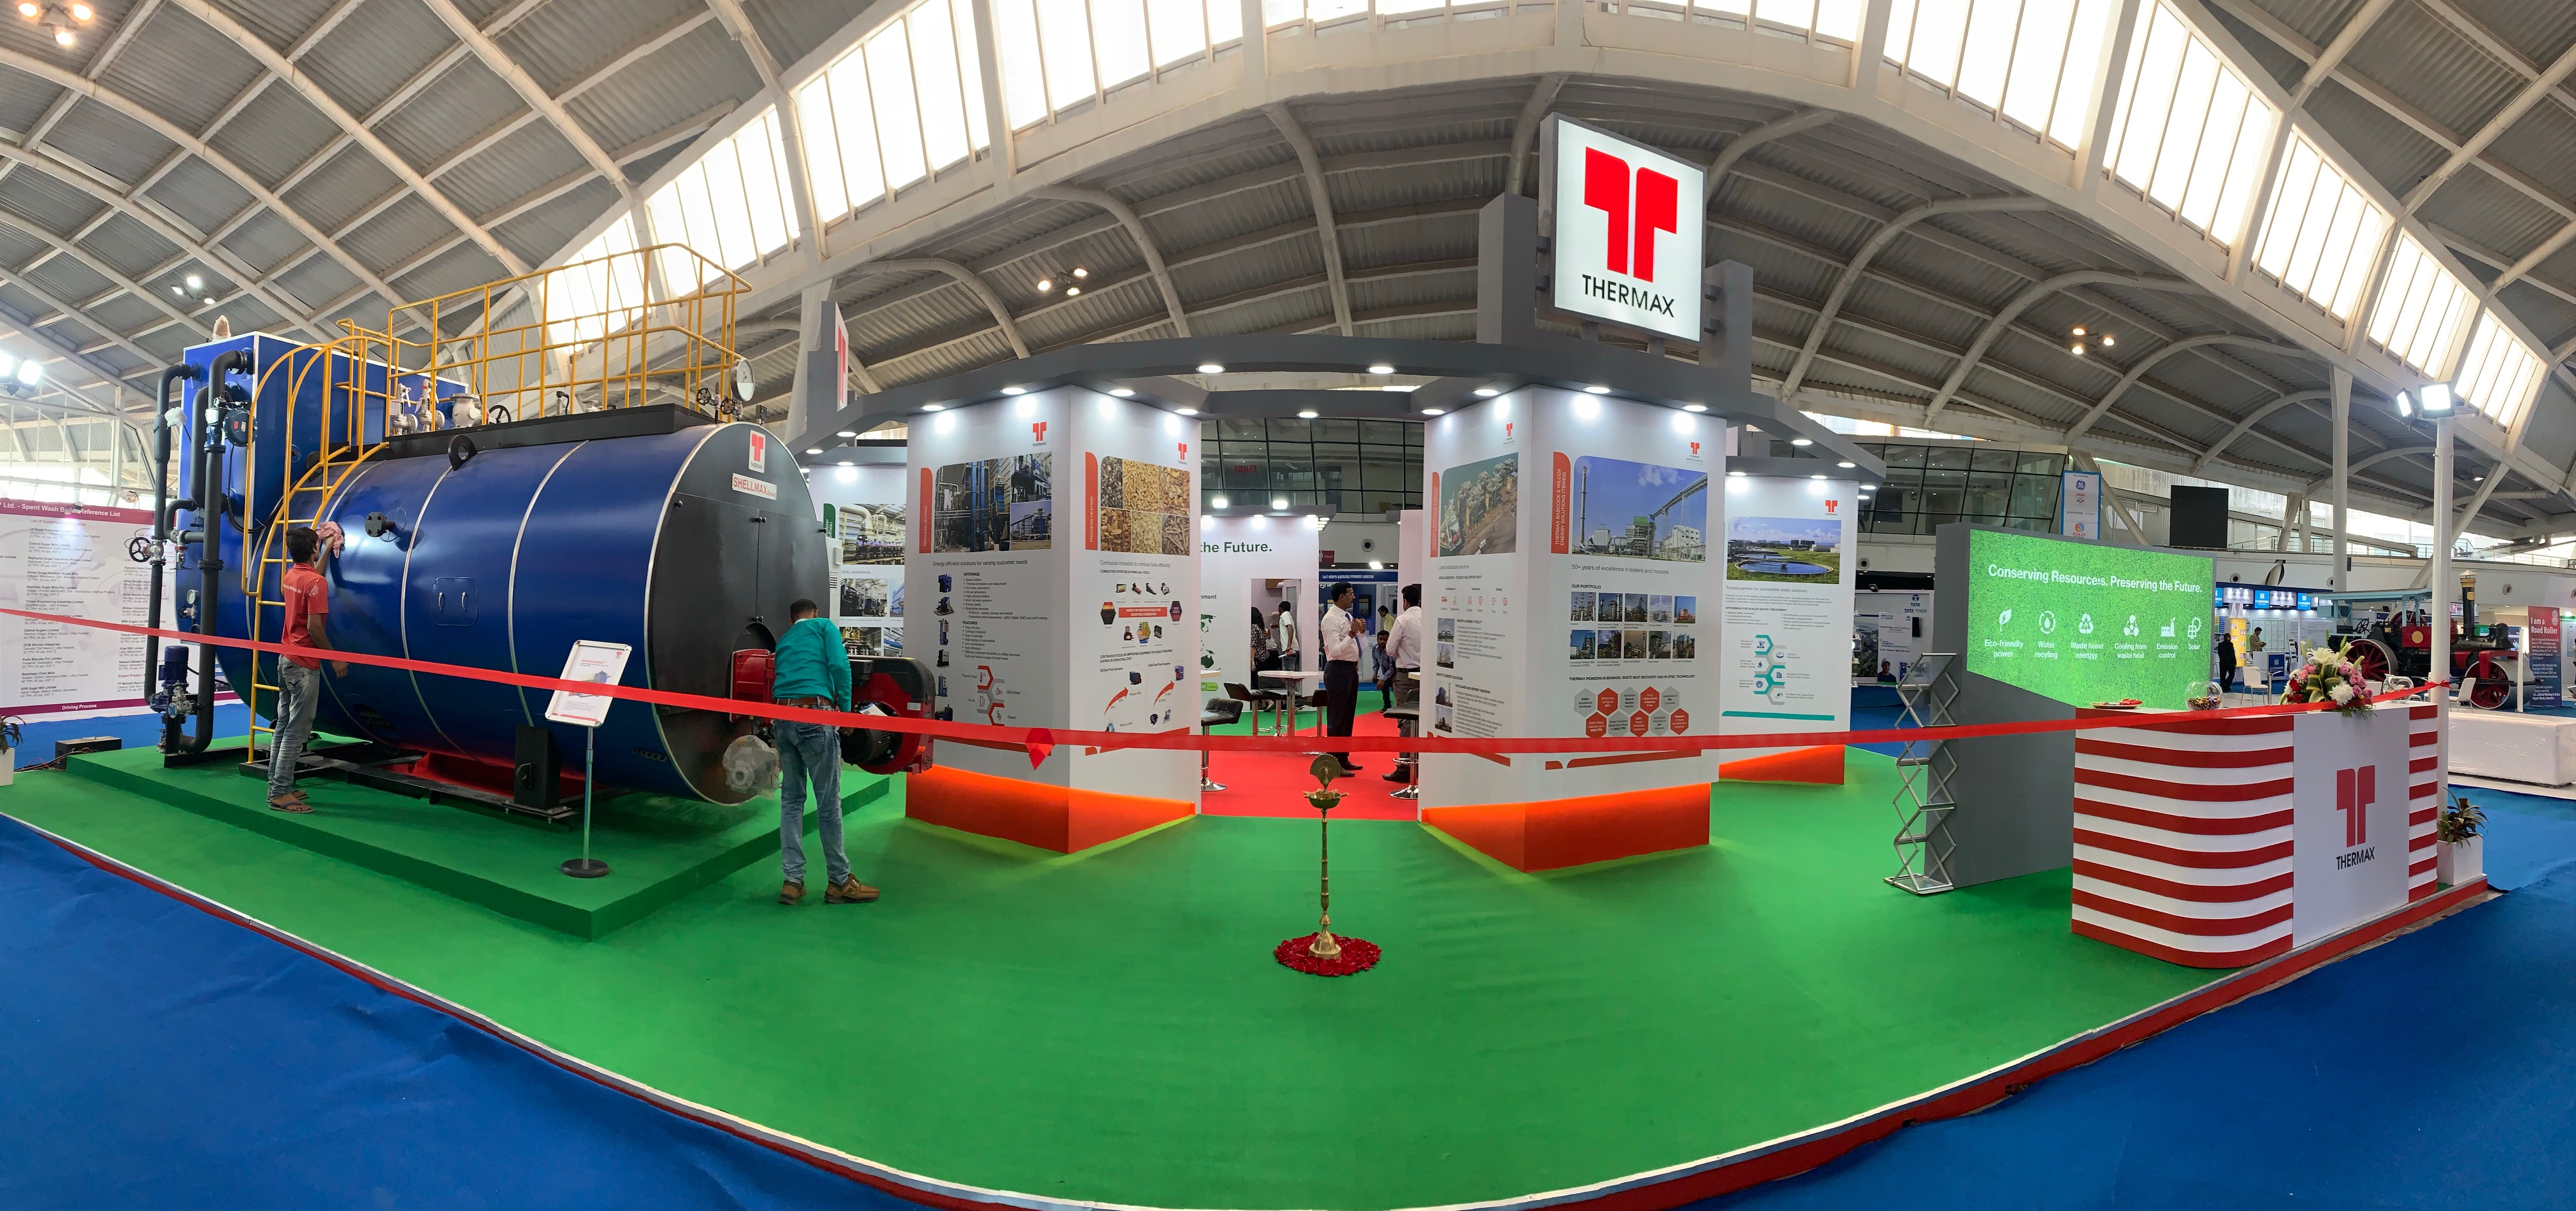 Thermax booth at Boiler India 2020